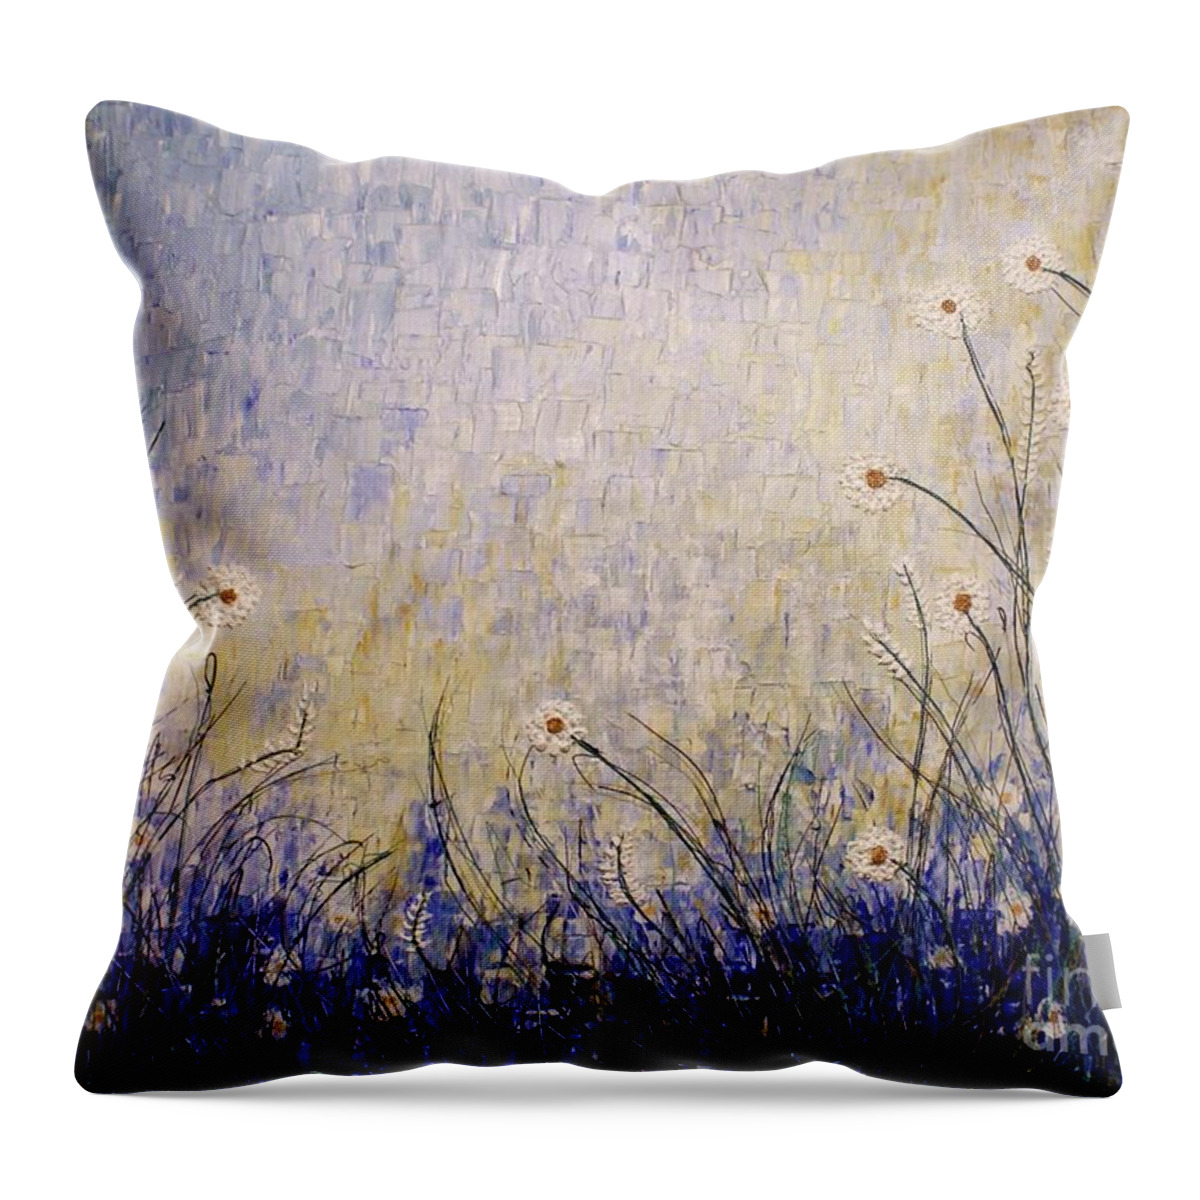 Flowers Throw Pillow featuring the painting Blue Valley by Jane Chesnut